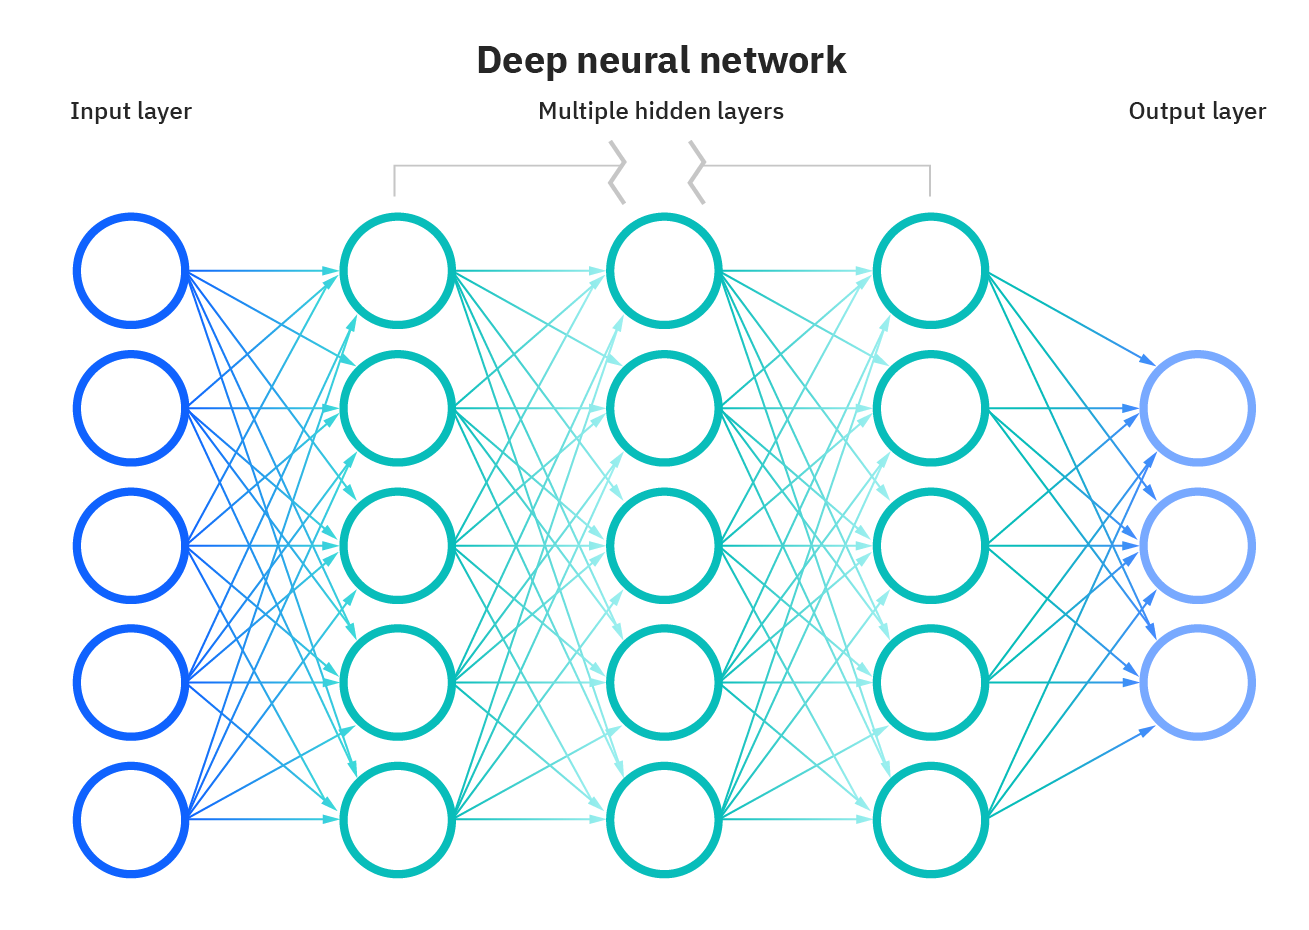 Illustration of a the inputs, hidden layers, and outputs of a Neural network